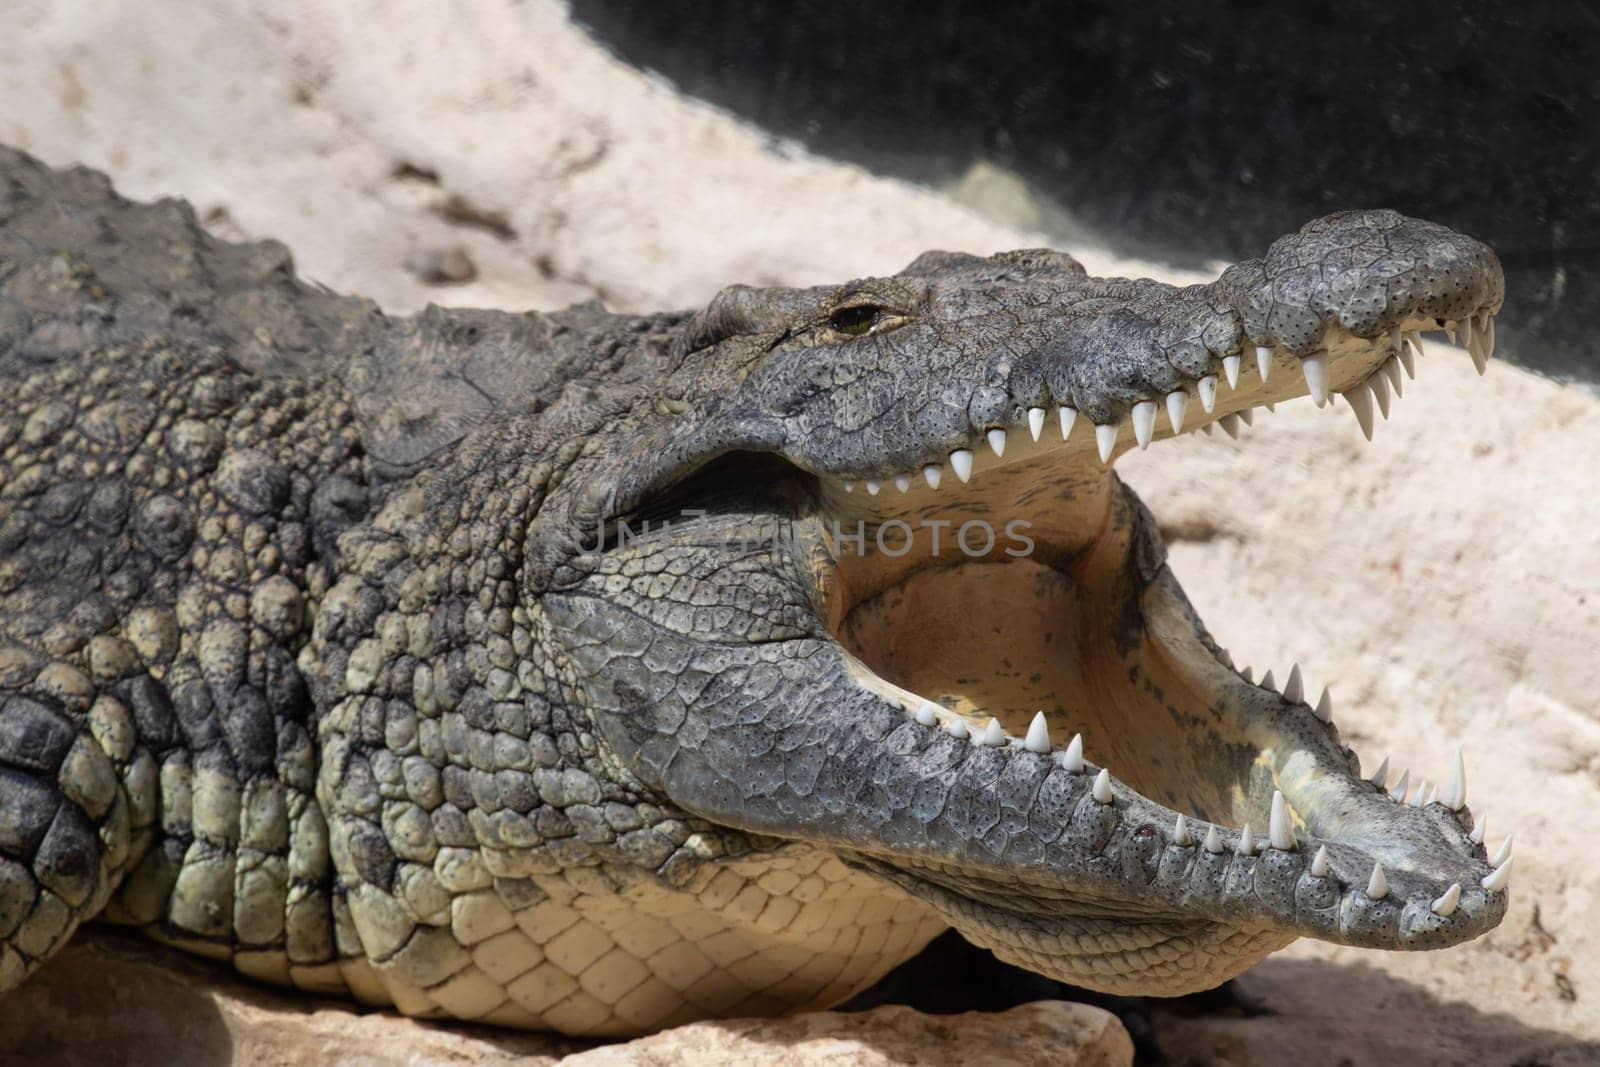 The crocodile opened its mouth in anticipation of prey by gordiza